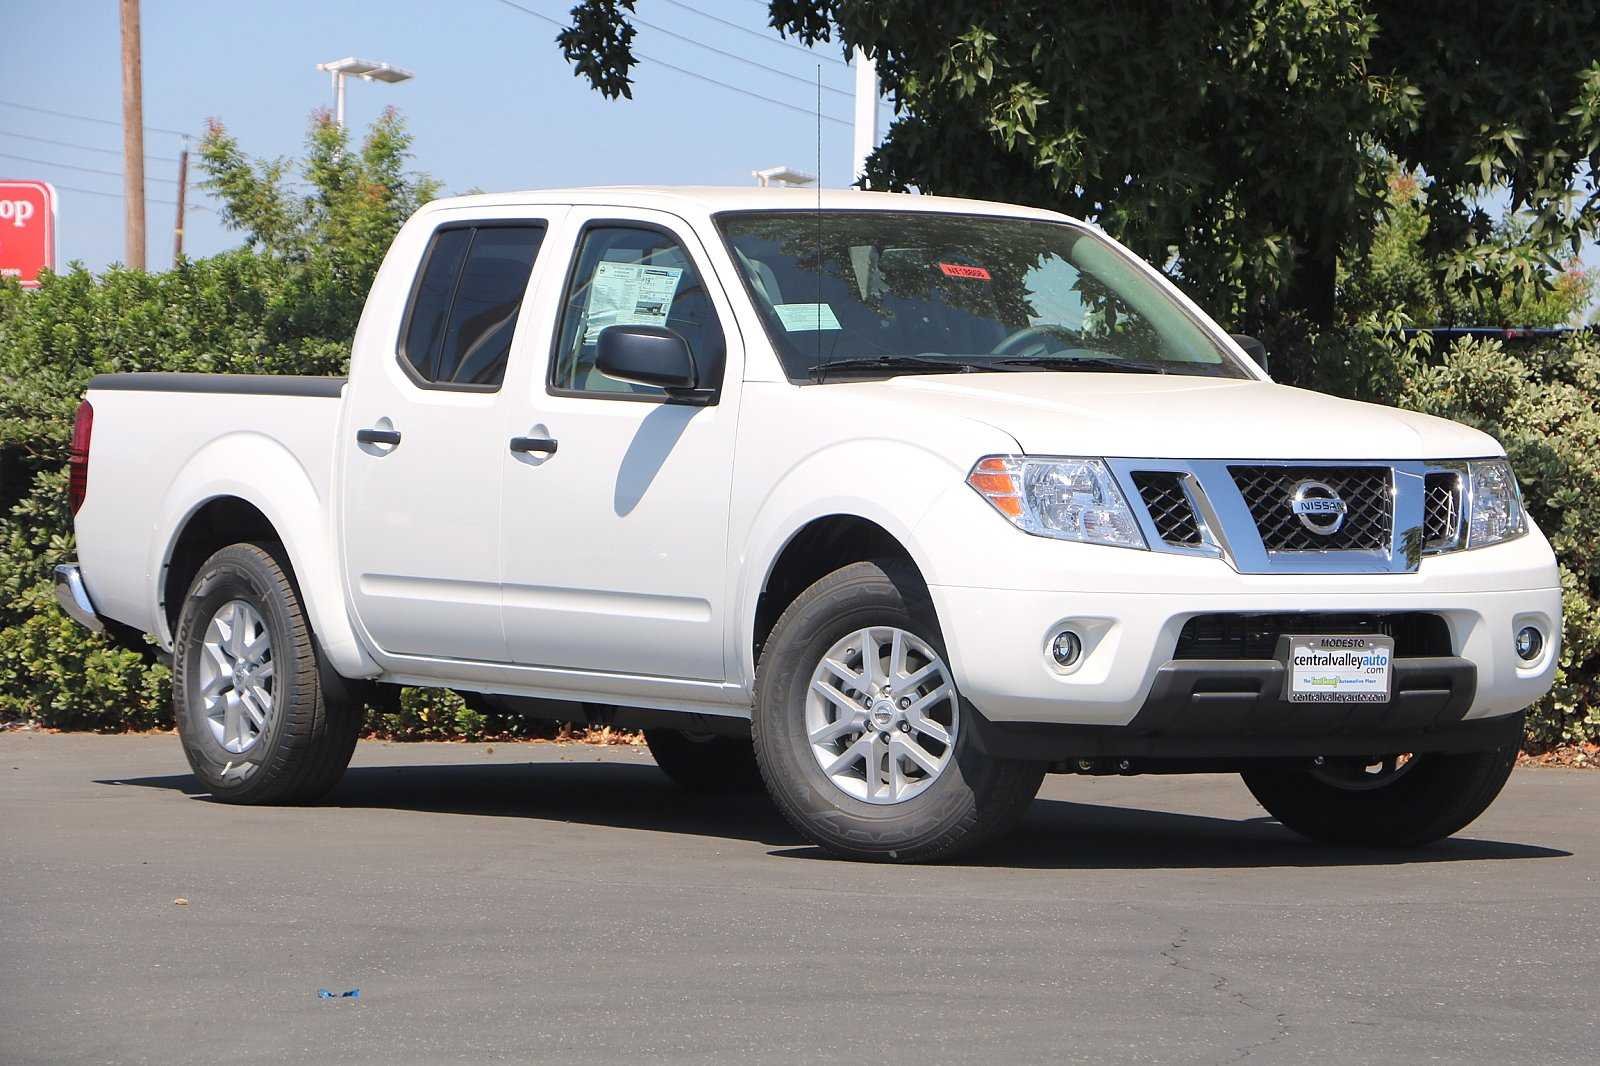 Usb port on nissan frontier 2014 can i download free